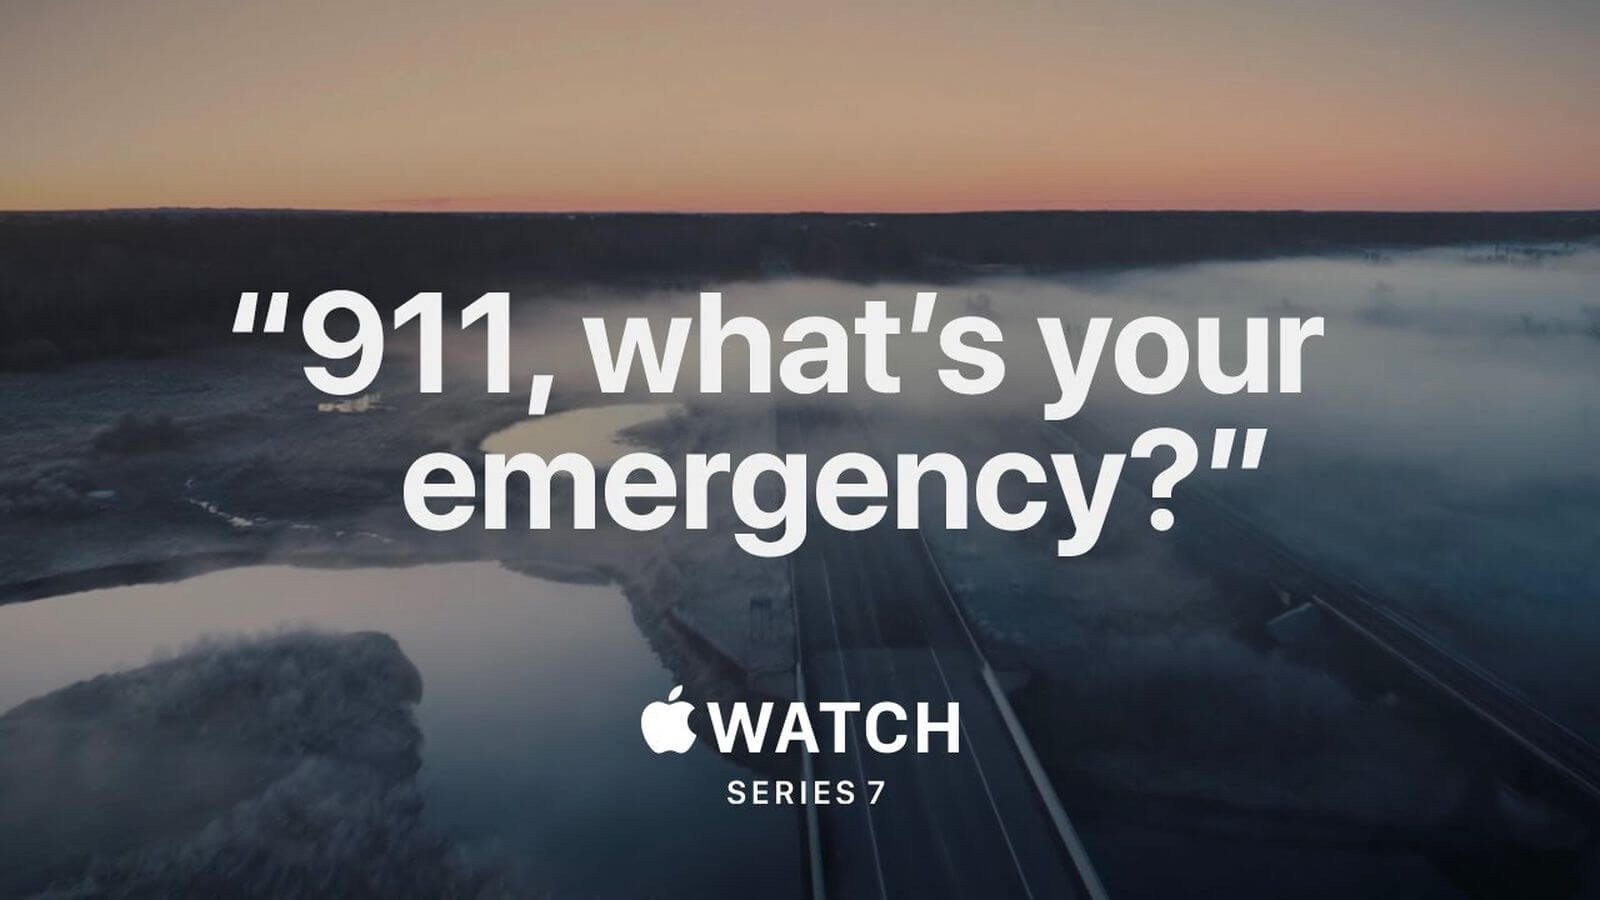 Great Content Marketing Example by Apple